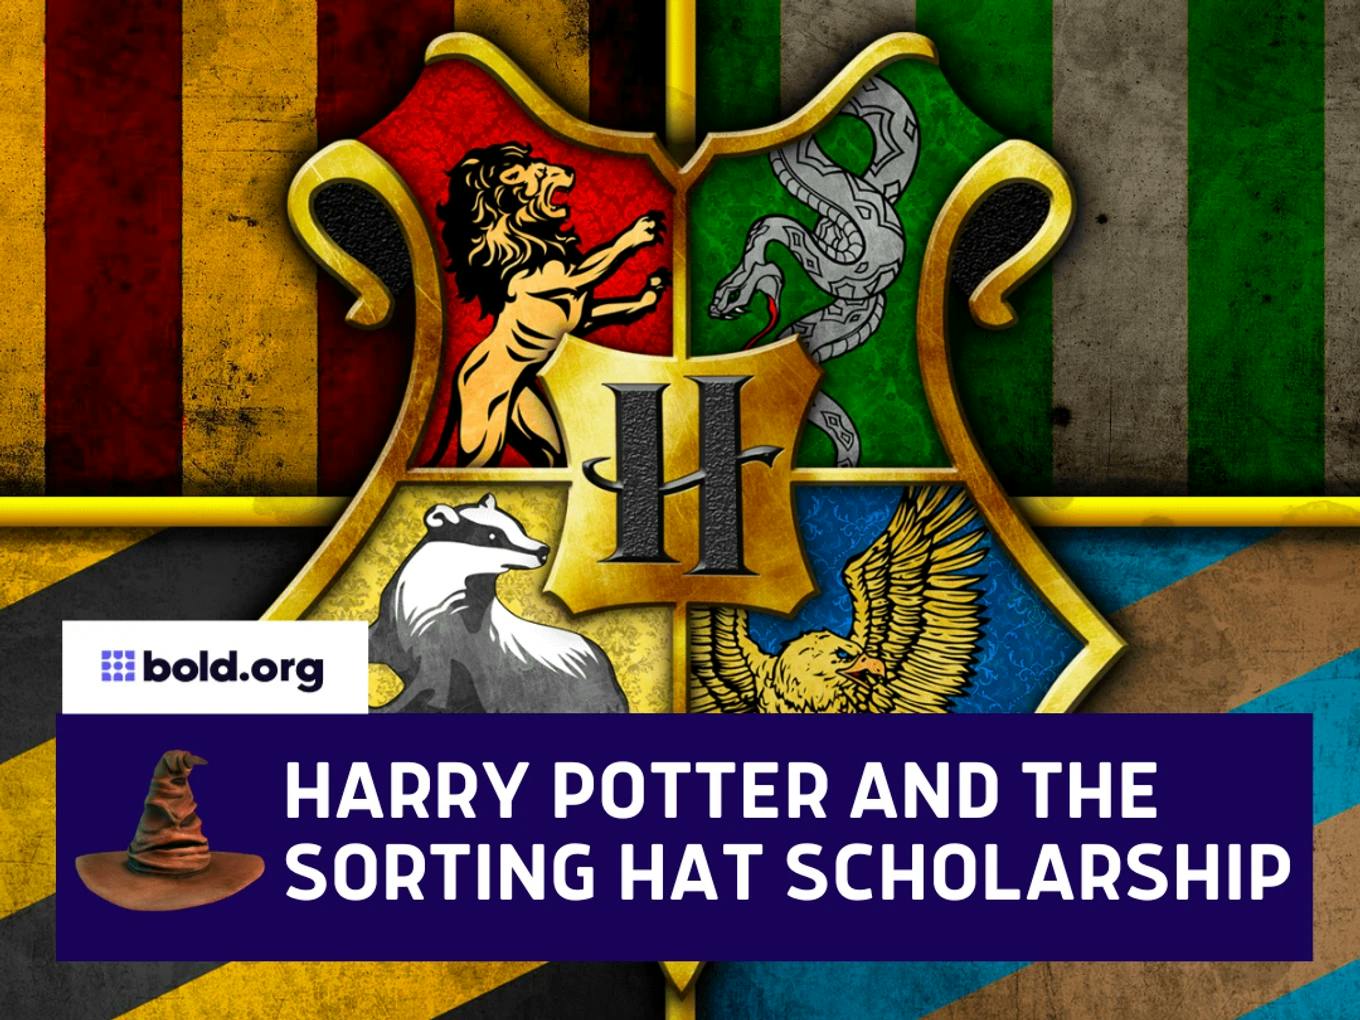 Harry Potter and the Sorting Hat Scholarship